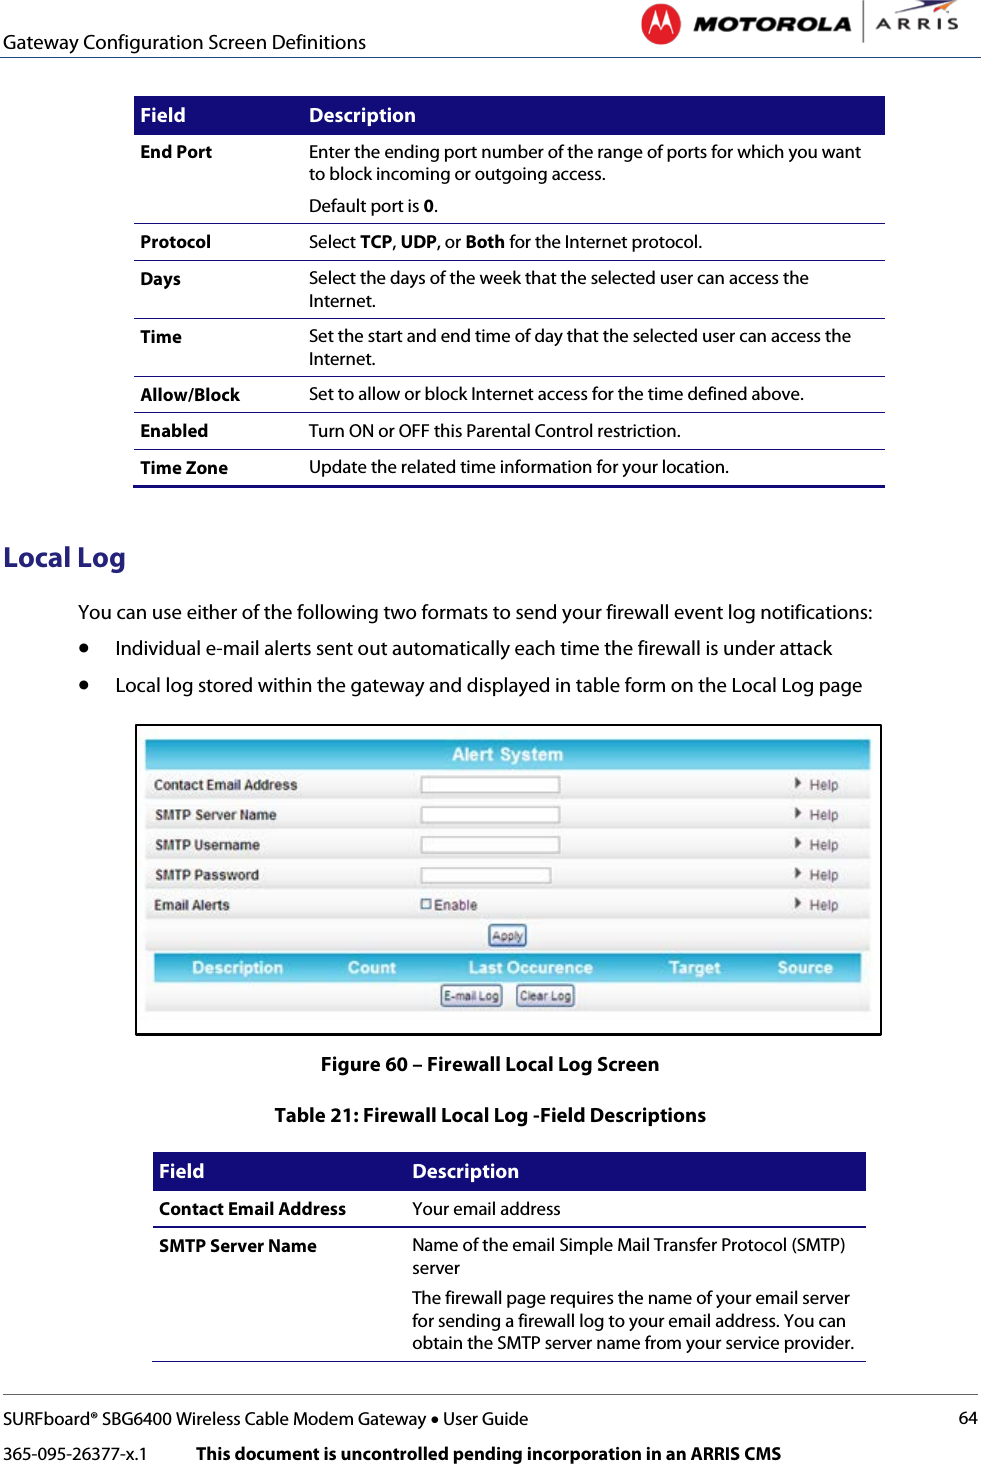 Gateway Configuration Screen Definitions   SURFboard® SBG6400 Wireless Cable Modem Gateway • User Guide 64 365-095-26377-x.1            This document is uncontrolled pending incorporation in an ARRIS CMS  Field Description End Port Enter the ending port number of the range of ports for which you want to block incoming or outgoing access. Default port is 0. Protocol Select TCP, UDP, or Both for the Internet protocol. Days Select the days of the week that the selected user can access the Internet. Time Set the start and end time of day that the selected user can access the Internet. Allow/Block Set to allow or block Internet access for the time defined above. Enabled Turn ON or OFF this Parental Control restriction. Time Zone Update the related time information for your location.  Local Log  You can use either of the following two formats to send your firewall event log notifications: • Individual e-mail alerts sent out automatically each time the firewall is under attack • Local log stored within the gateway and displayed in table form on the Local Log page  Figure 60 – Firewall Local Log Screen Table 21: Firewall Local Log -Field Descriptions Field Description Contact Email Address Your email address SMTP Server Name Name of the email Simple Mail Transfer Protocol (SMTP) server The firewall page requires the name of your email server for sending a firewall log to your email address. You can obtain the SMTP server name from your service provider. 